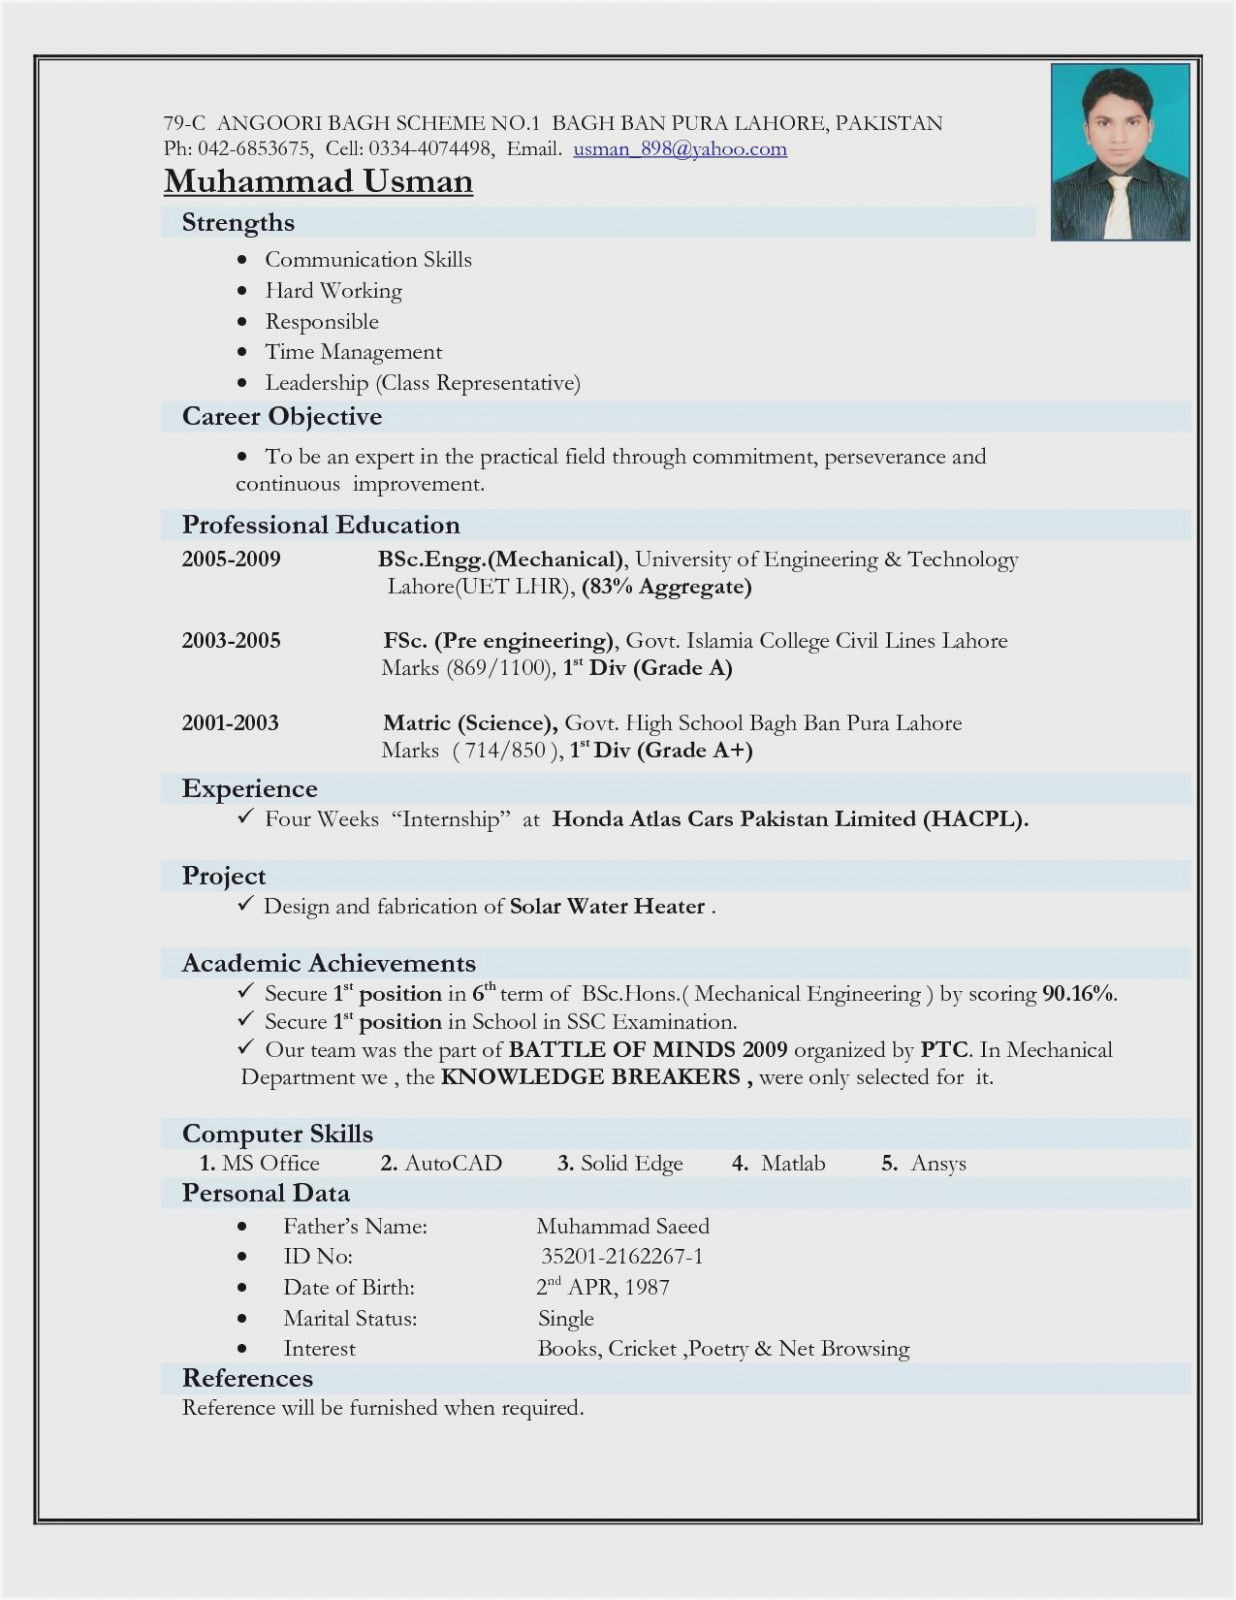 It Hardware and Networking Resume Samples 12 Engineer Resume Template Doc Job Resume format, Resume format …